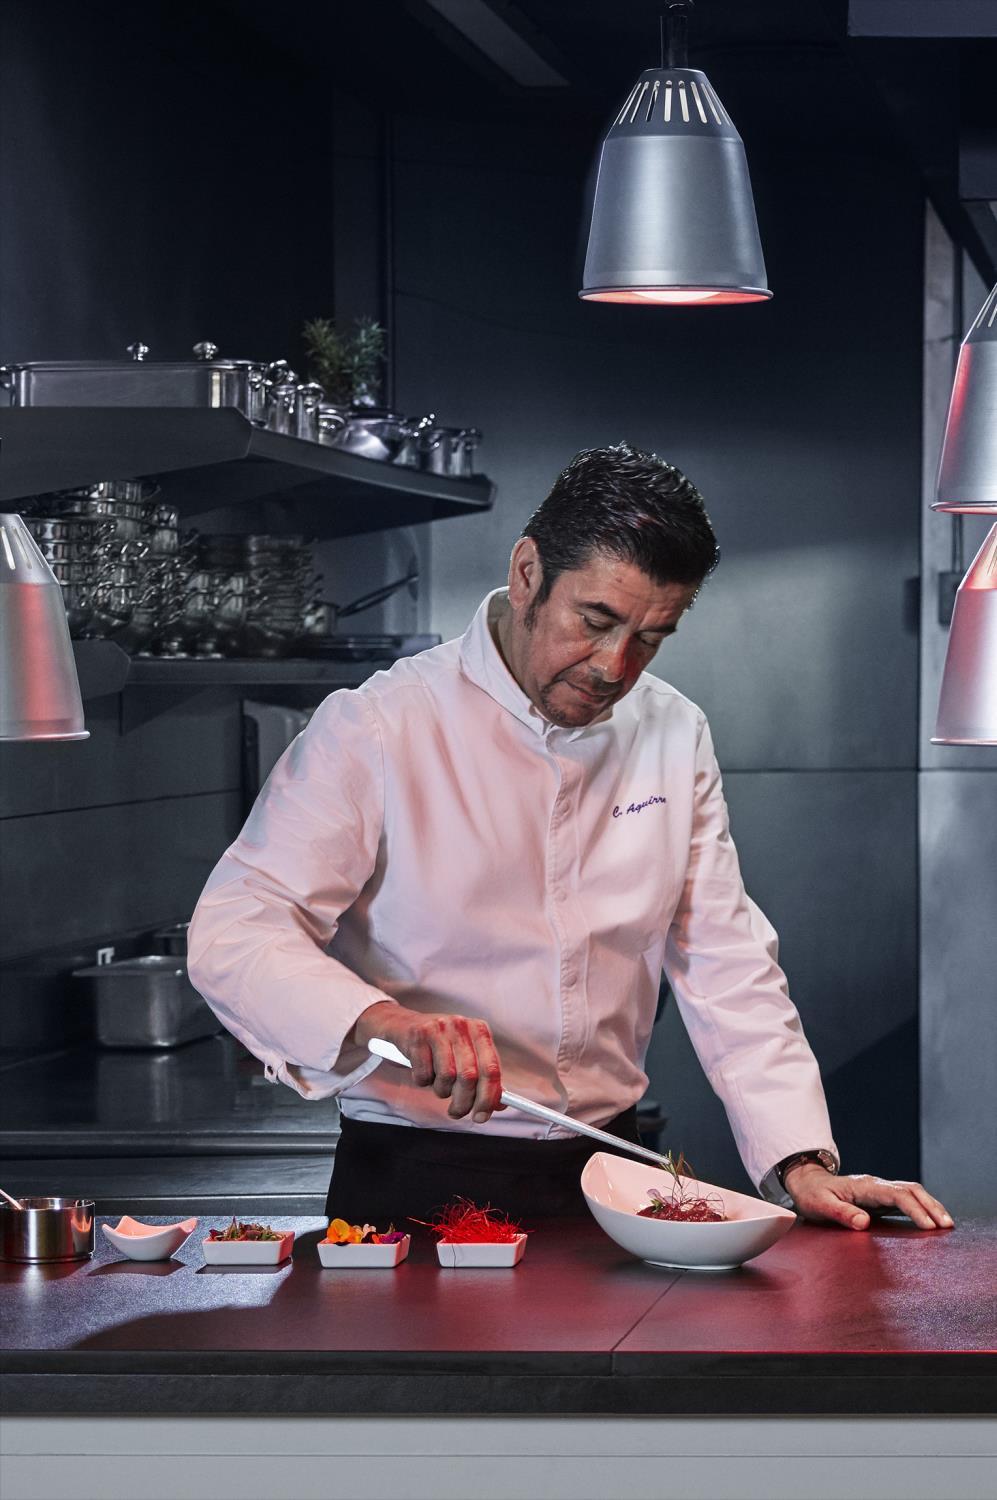 he creator of the delicious and multifarious menus of Royal Catering is the chef of Fairmont Rey Juan Carlos I, Claudio Aguirre.